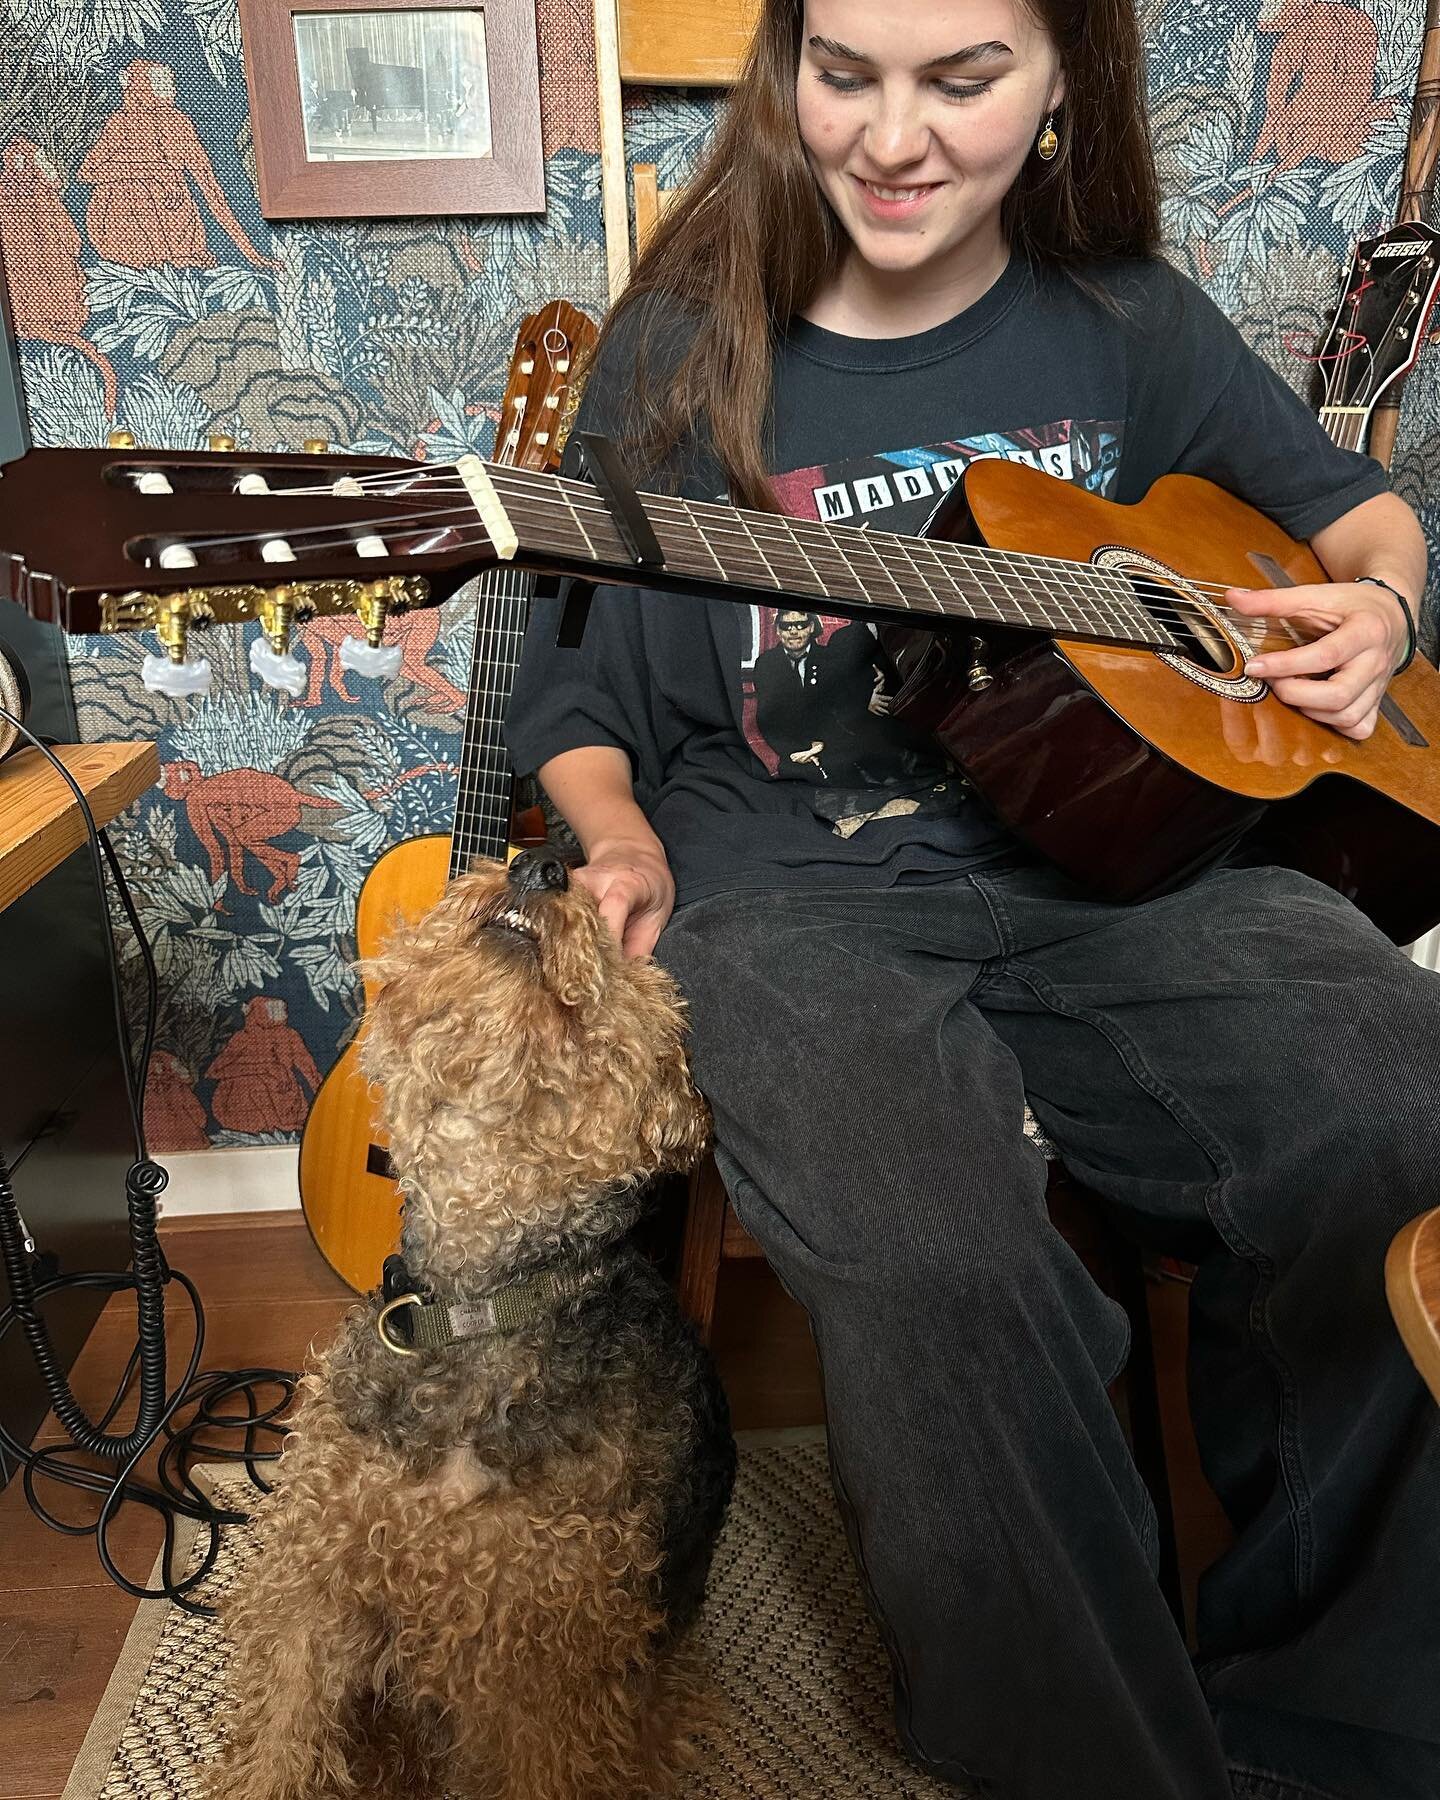 Mac getting some love from Eva. #amsterdamguitarlessons #gitaarlesamsterdamzuid #gitaarlesamsterdam